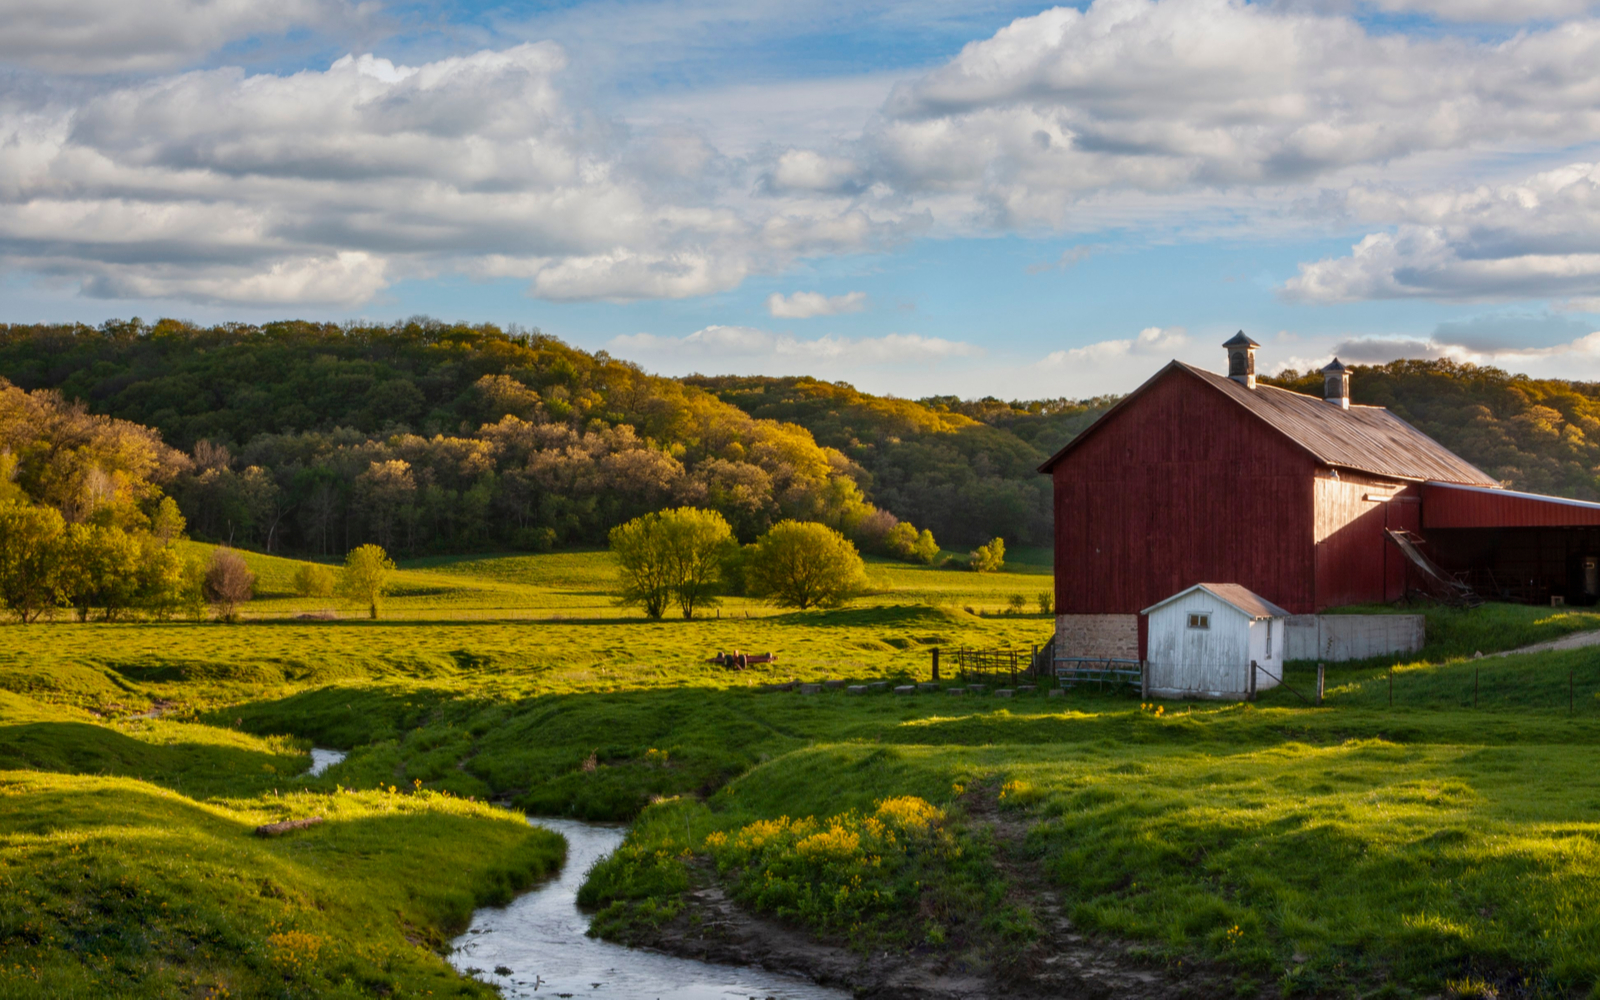 Image of a dairy farm, one of the best Wisconsin attractions, on a sunny day